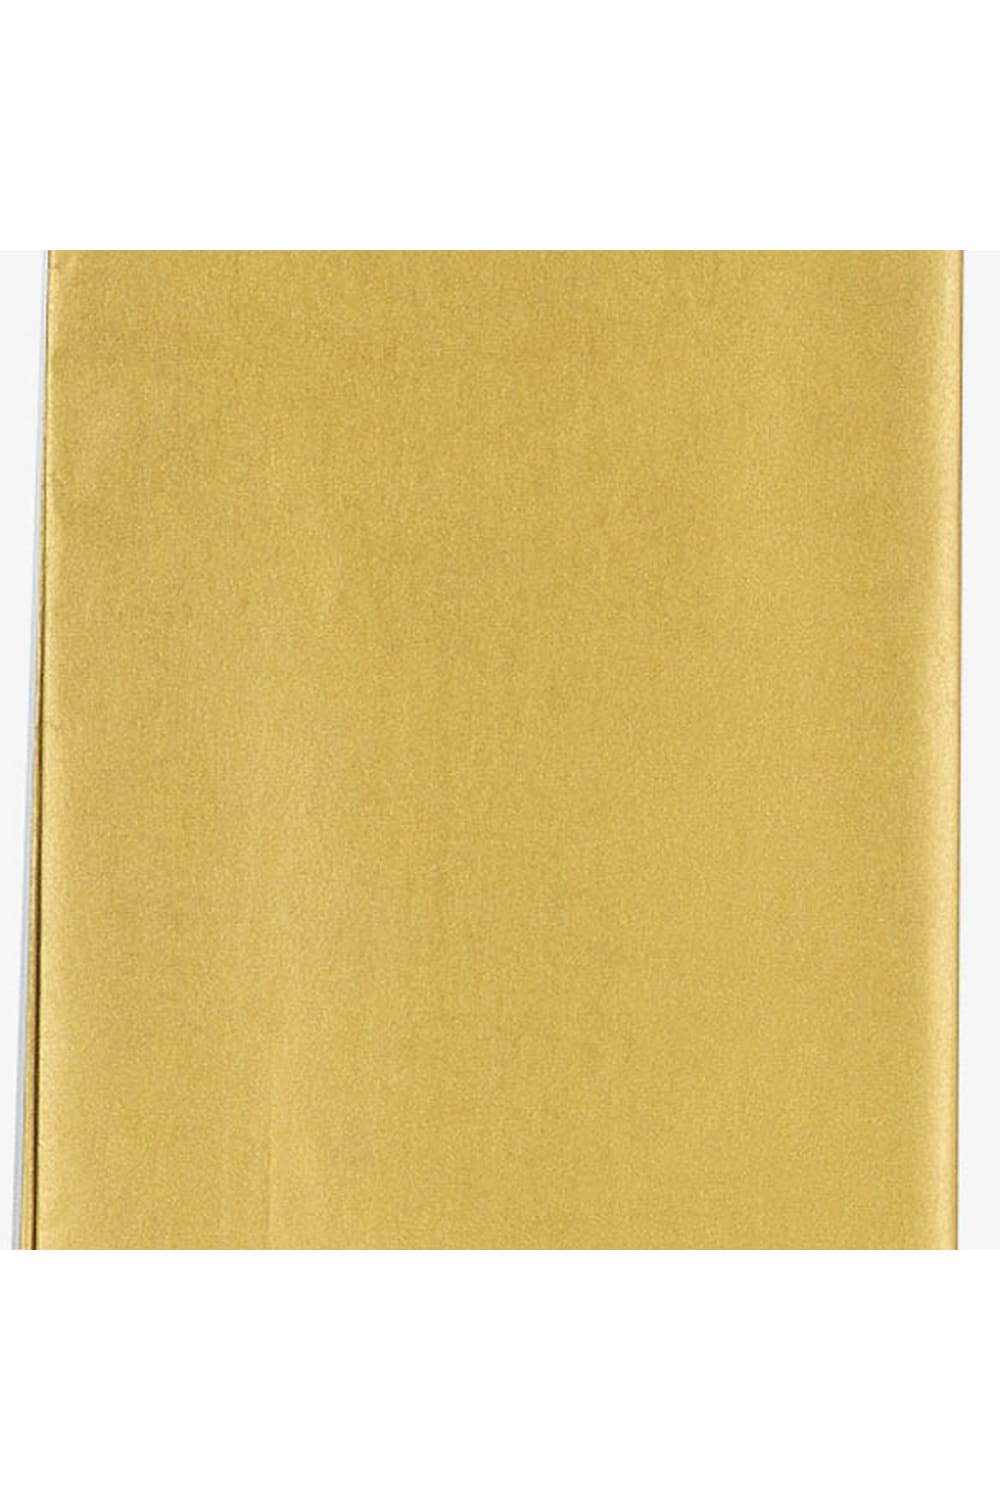 County Stationery Metallic Gold Crepe Paper (Pack Of 12) (Metallic Gold) (One Size)